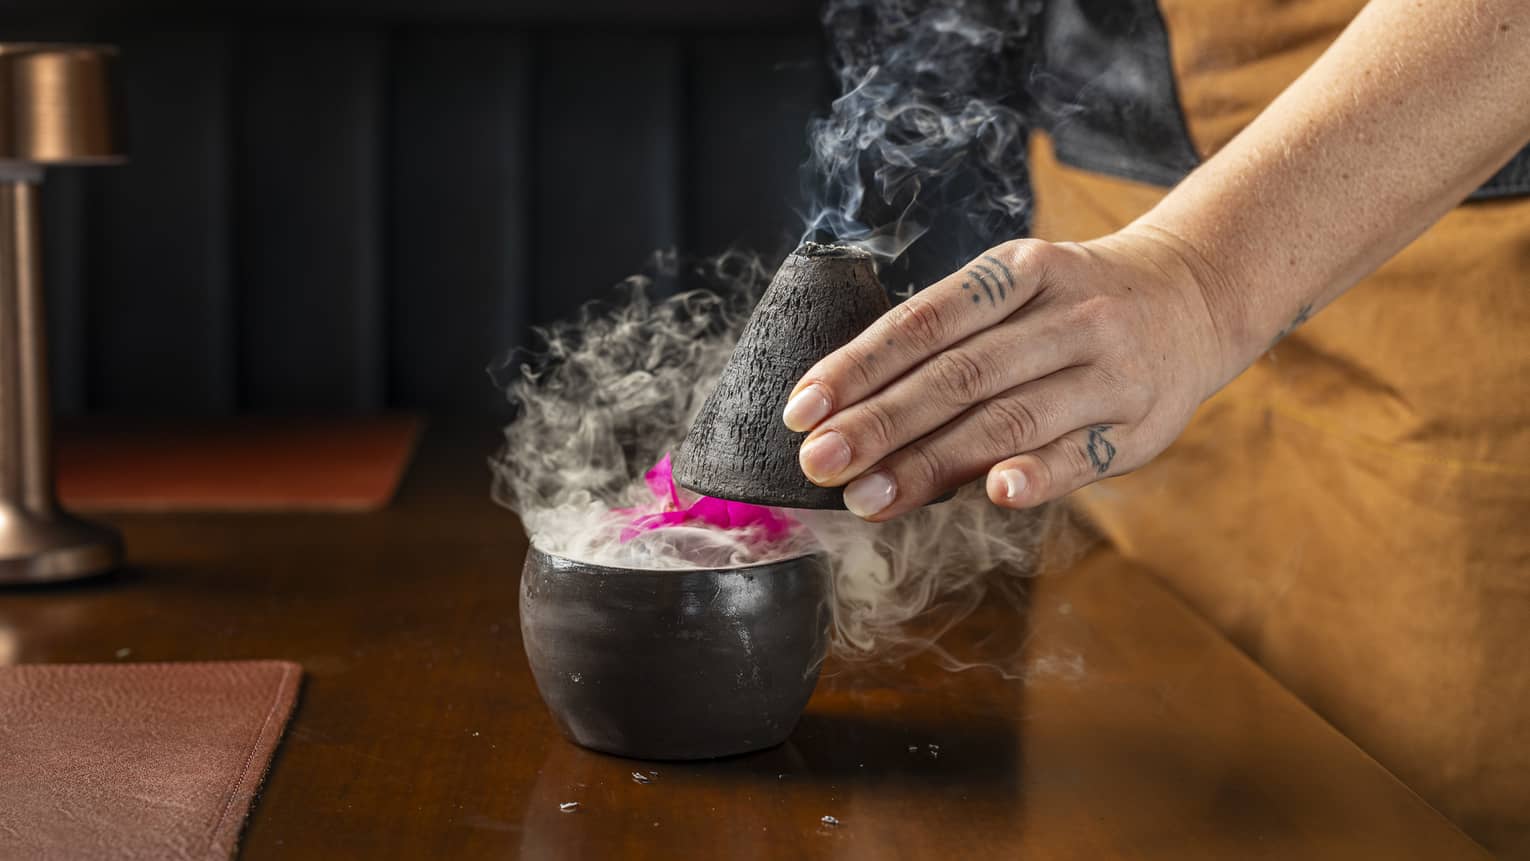 A tattooed chef's hand removes a black cone top from a small black bowl revealing a bright pink flower and plumes of smoke